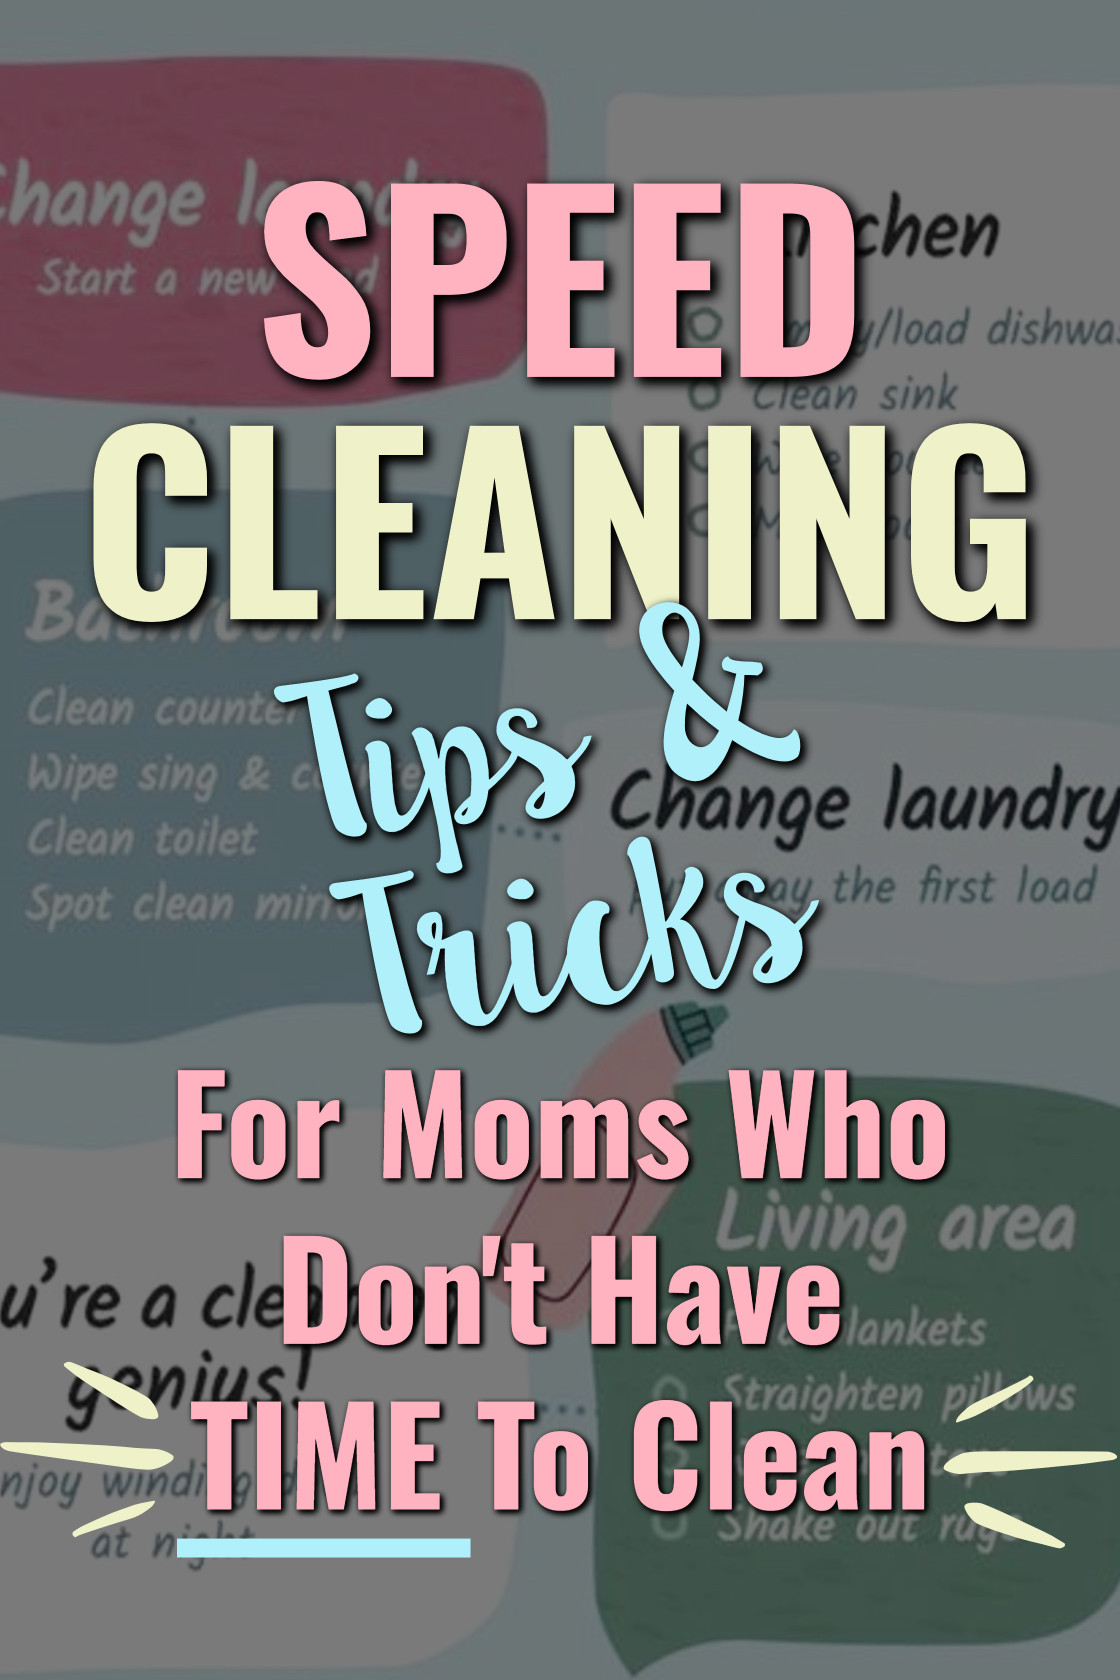 Speed cleaning tips and tricks for moms who don't have time to clean house